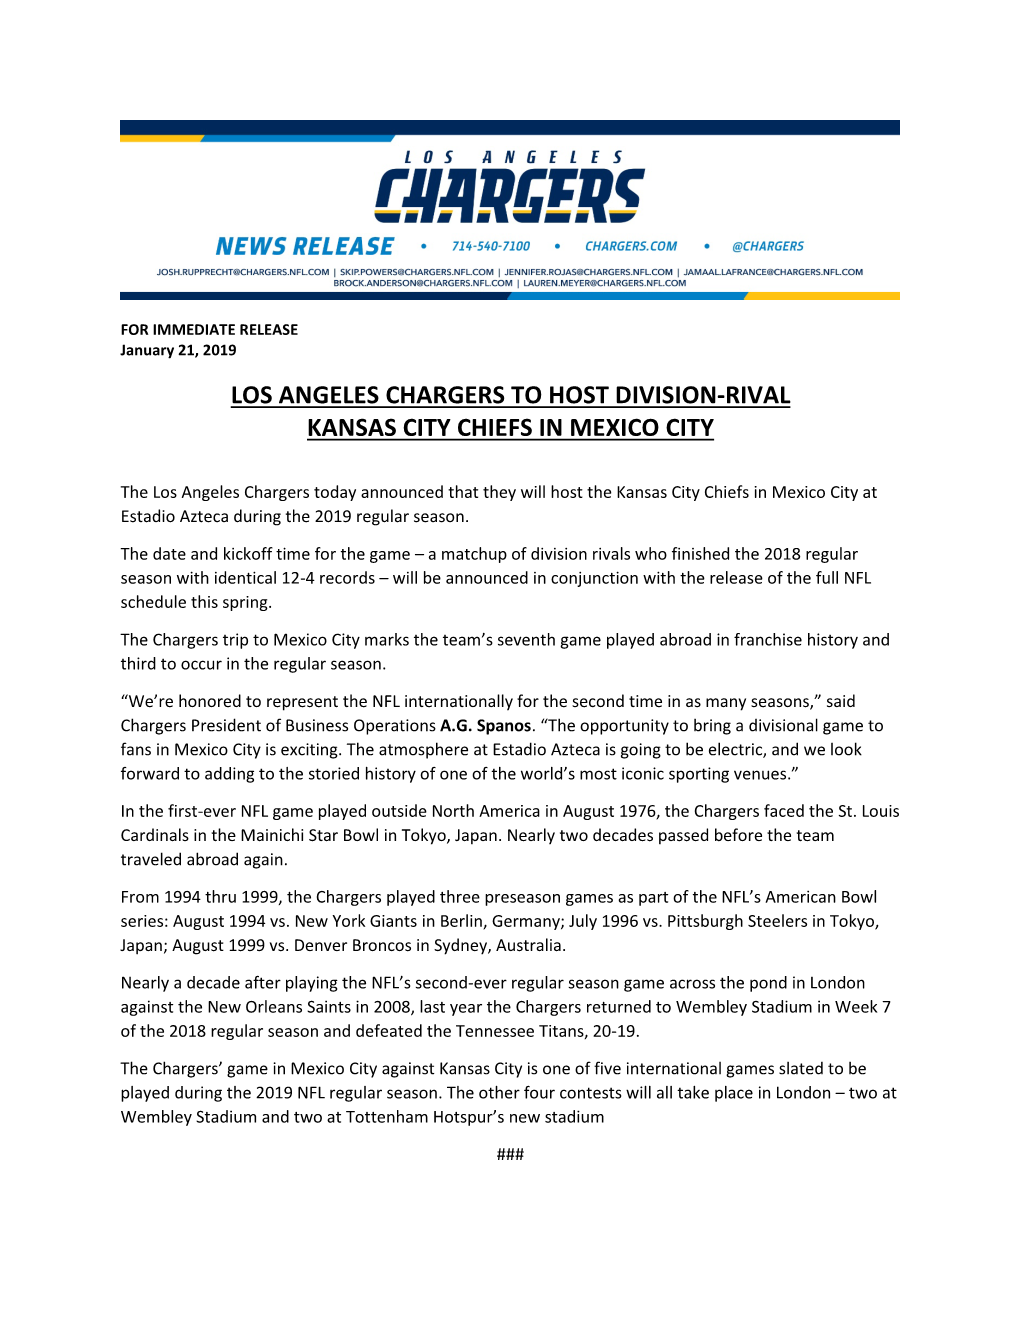 Los Angeles Chargers to Host Division-Rival Kansas City Chiefs in Mexico City